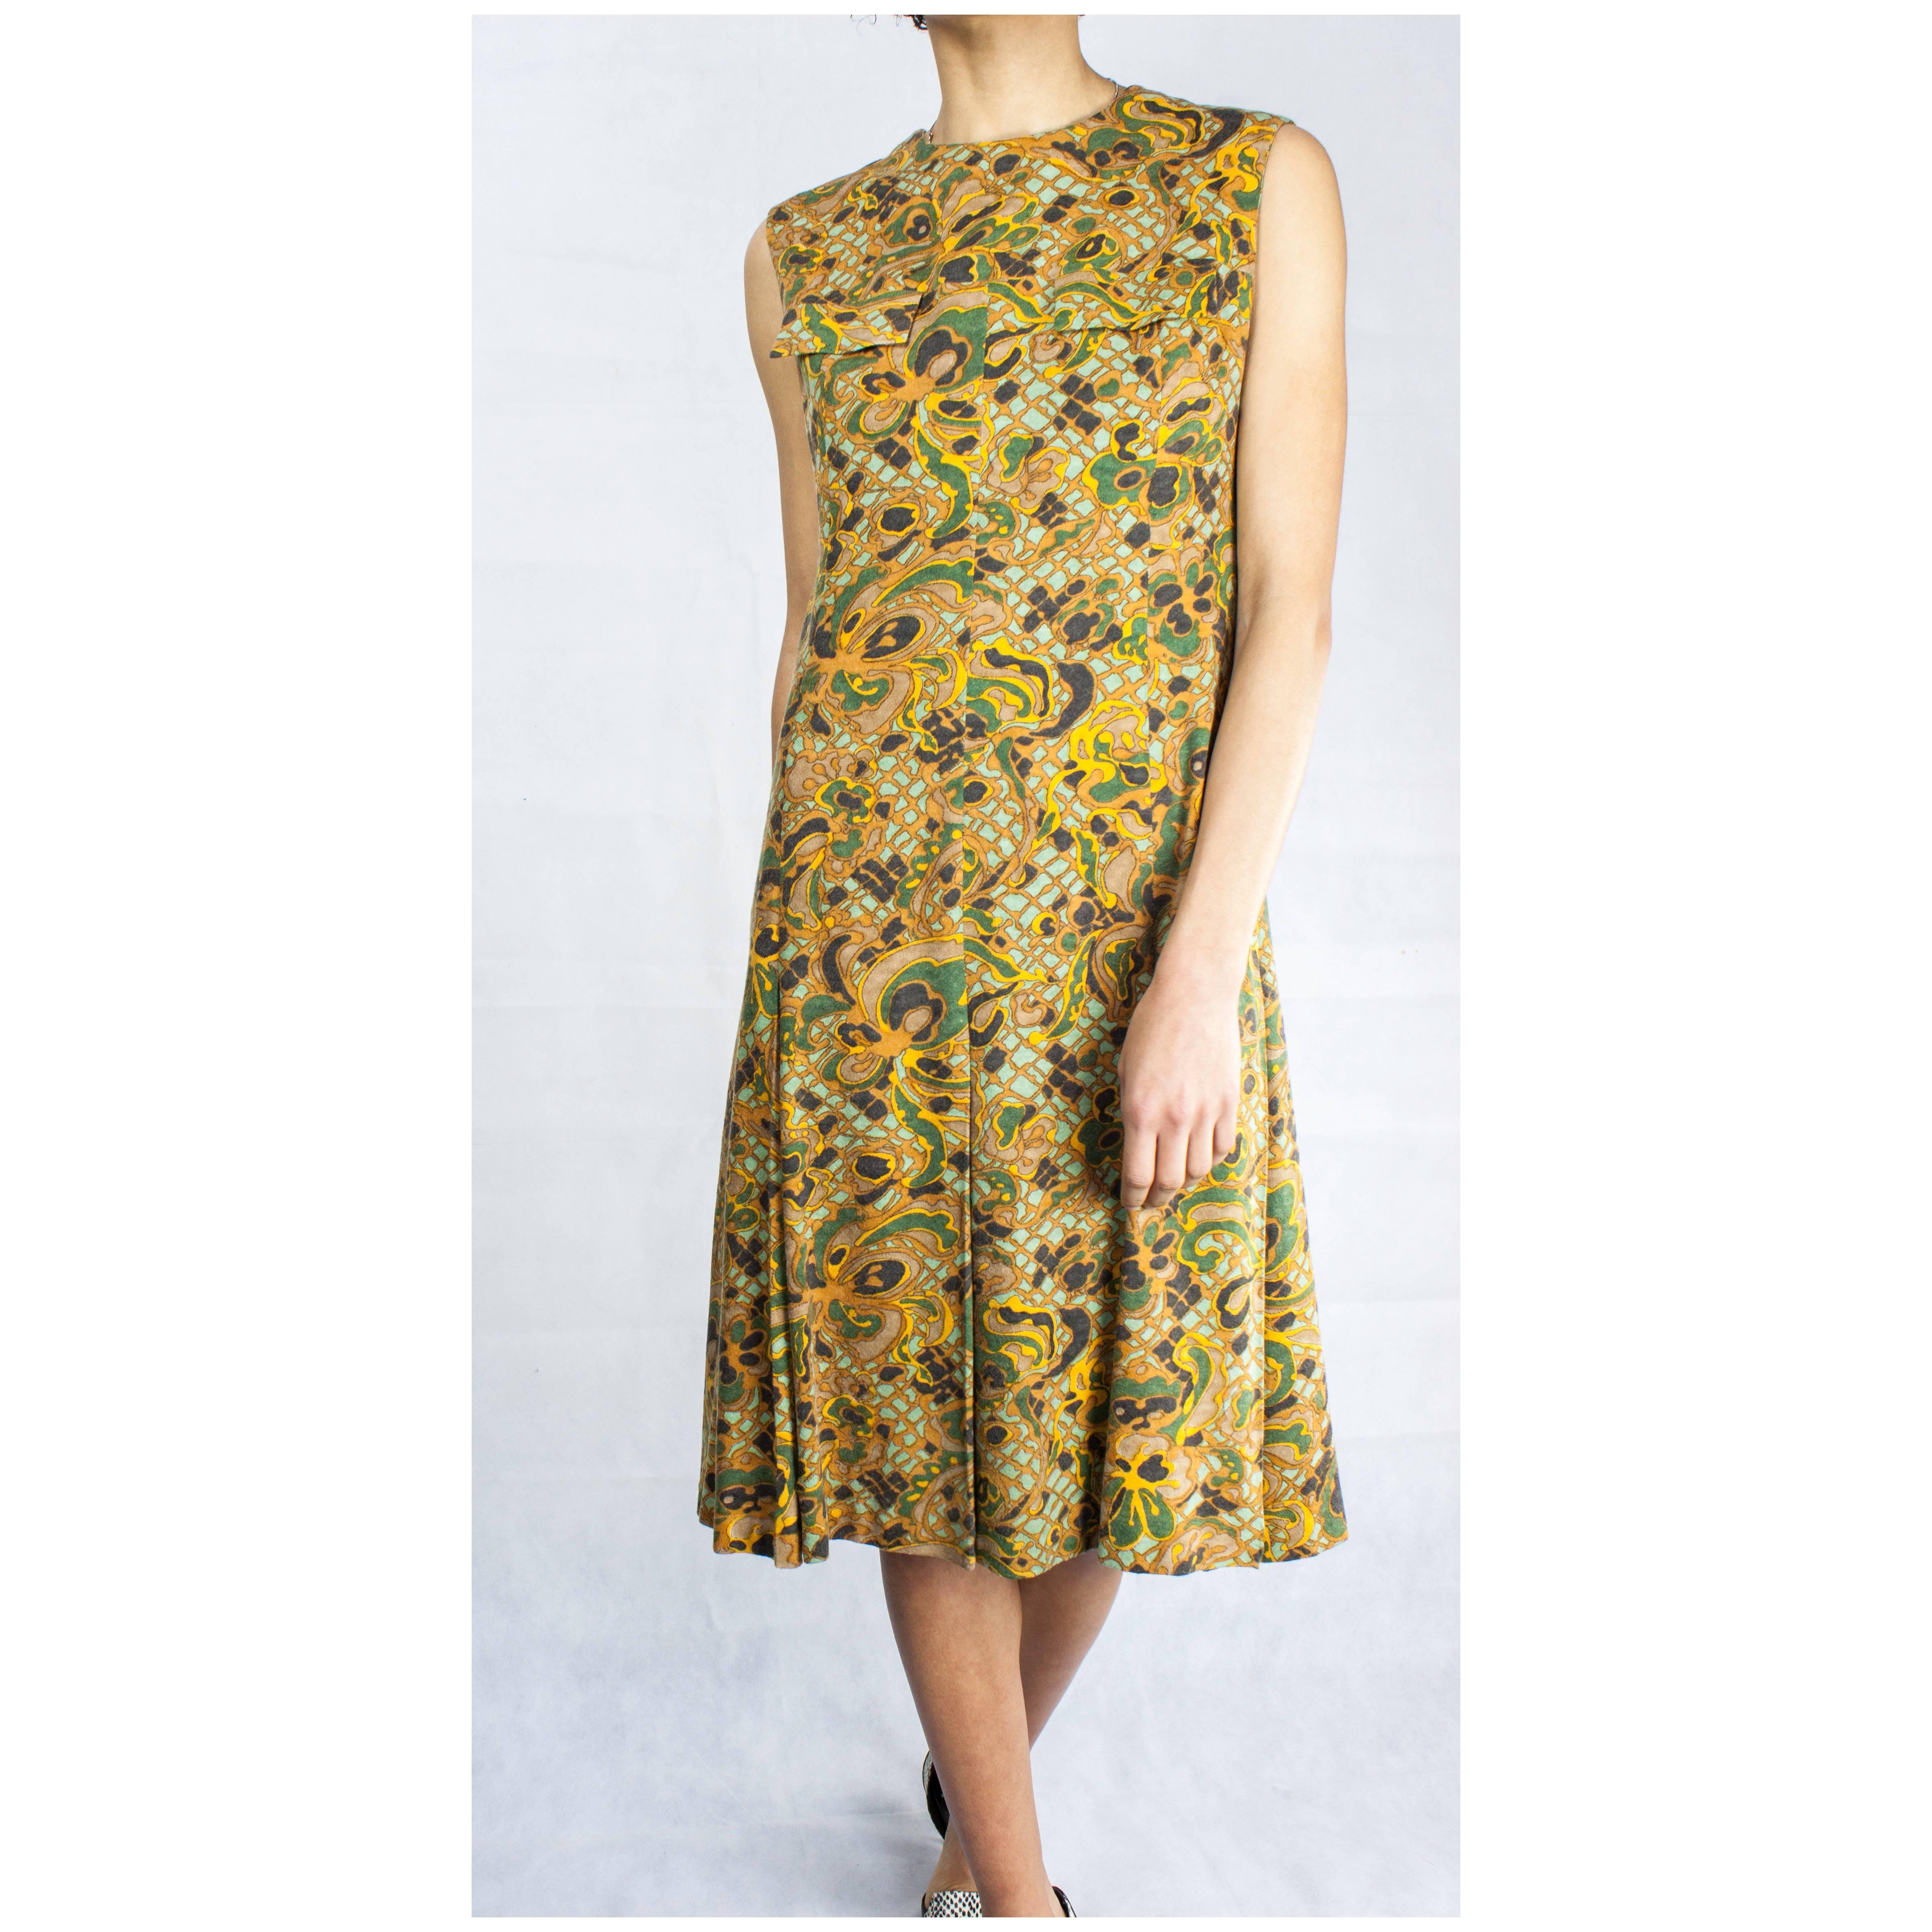 Jean Patou stylised floral motifs brushed wool dress, circa 1960s For Sale 1